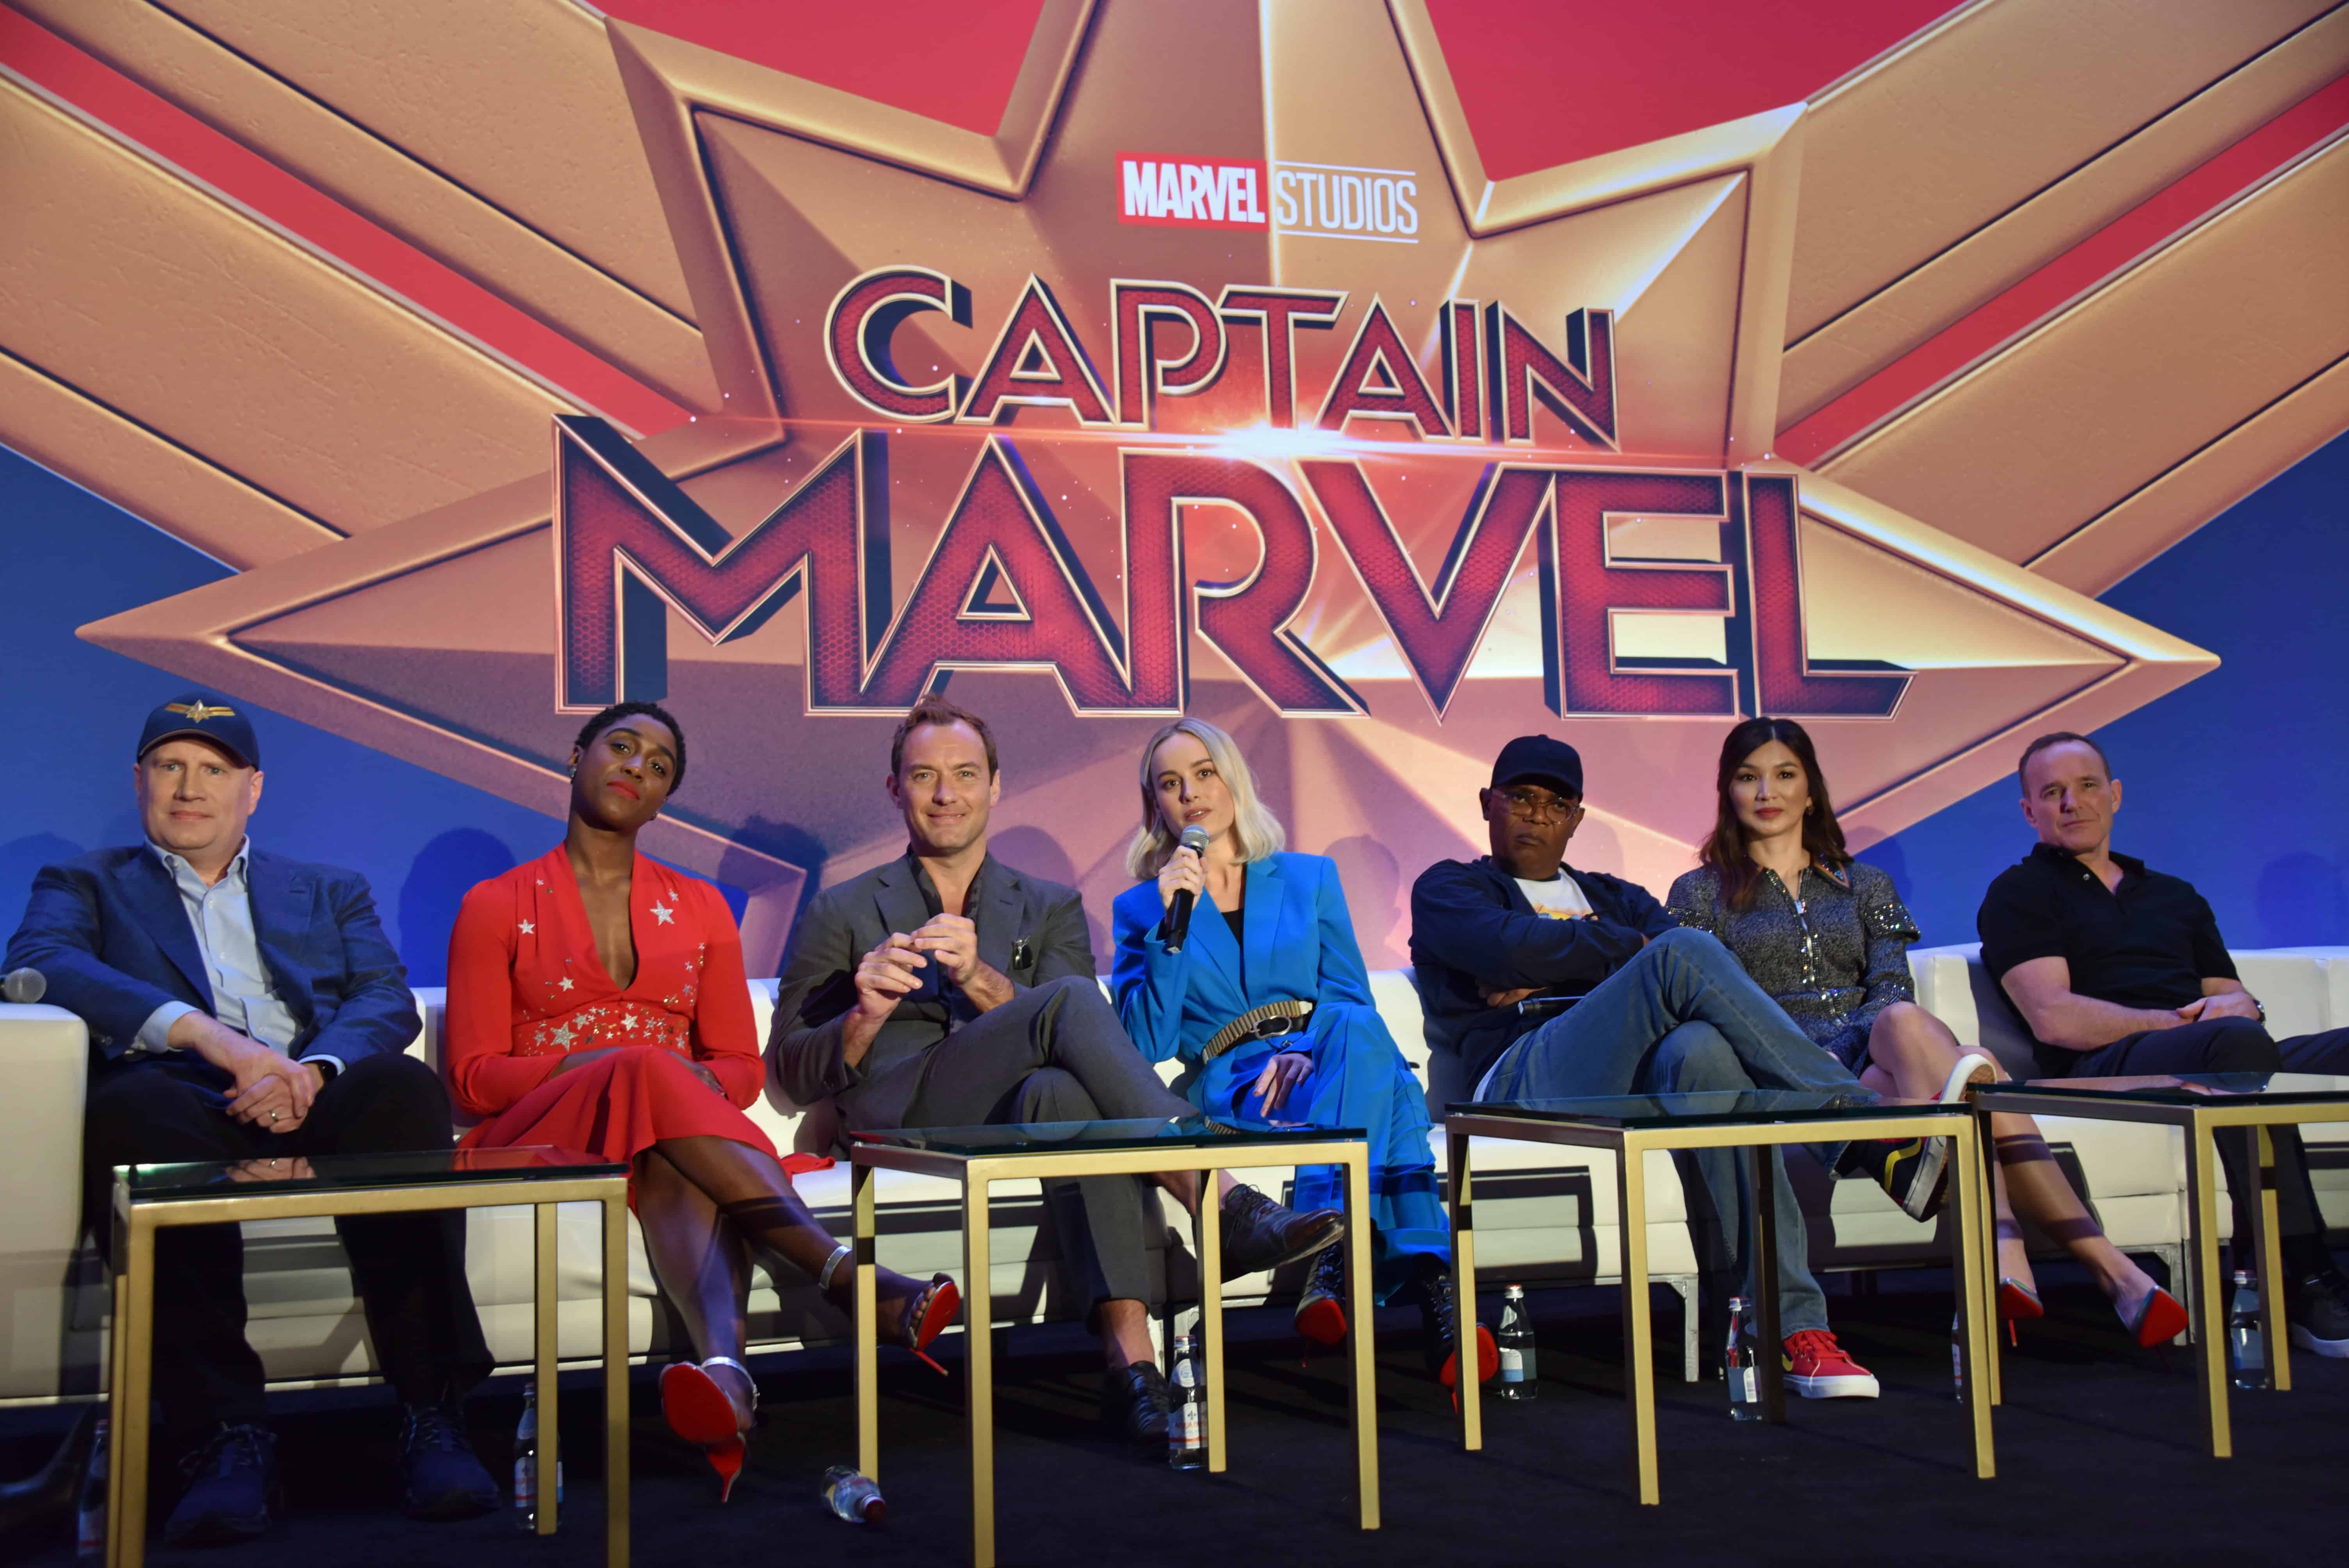 Captain Marvel Cast Interview: The Making of a New Superhero